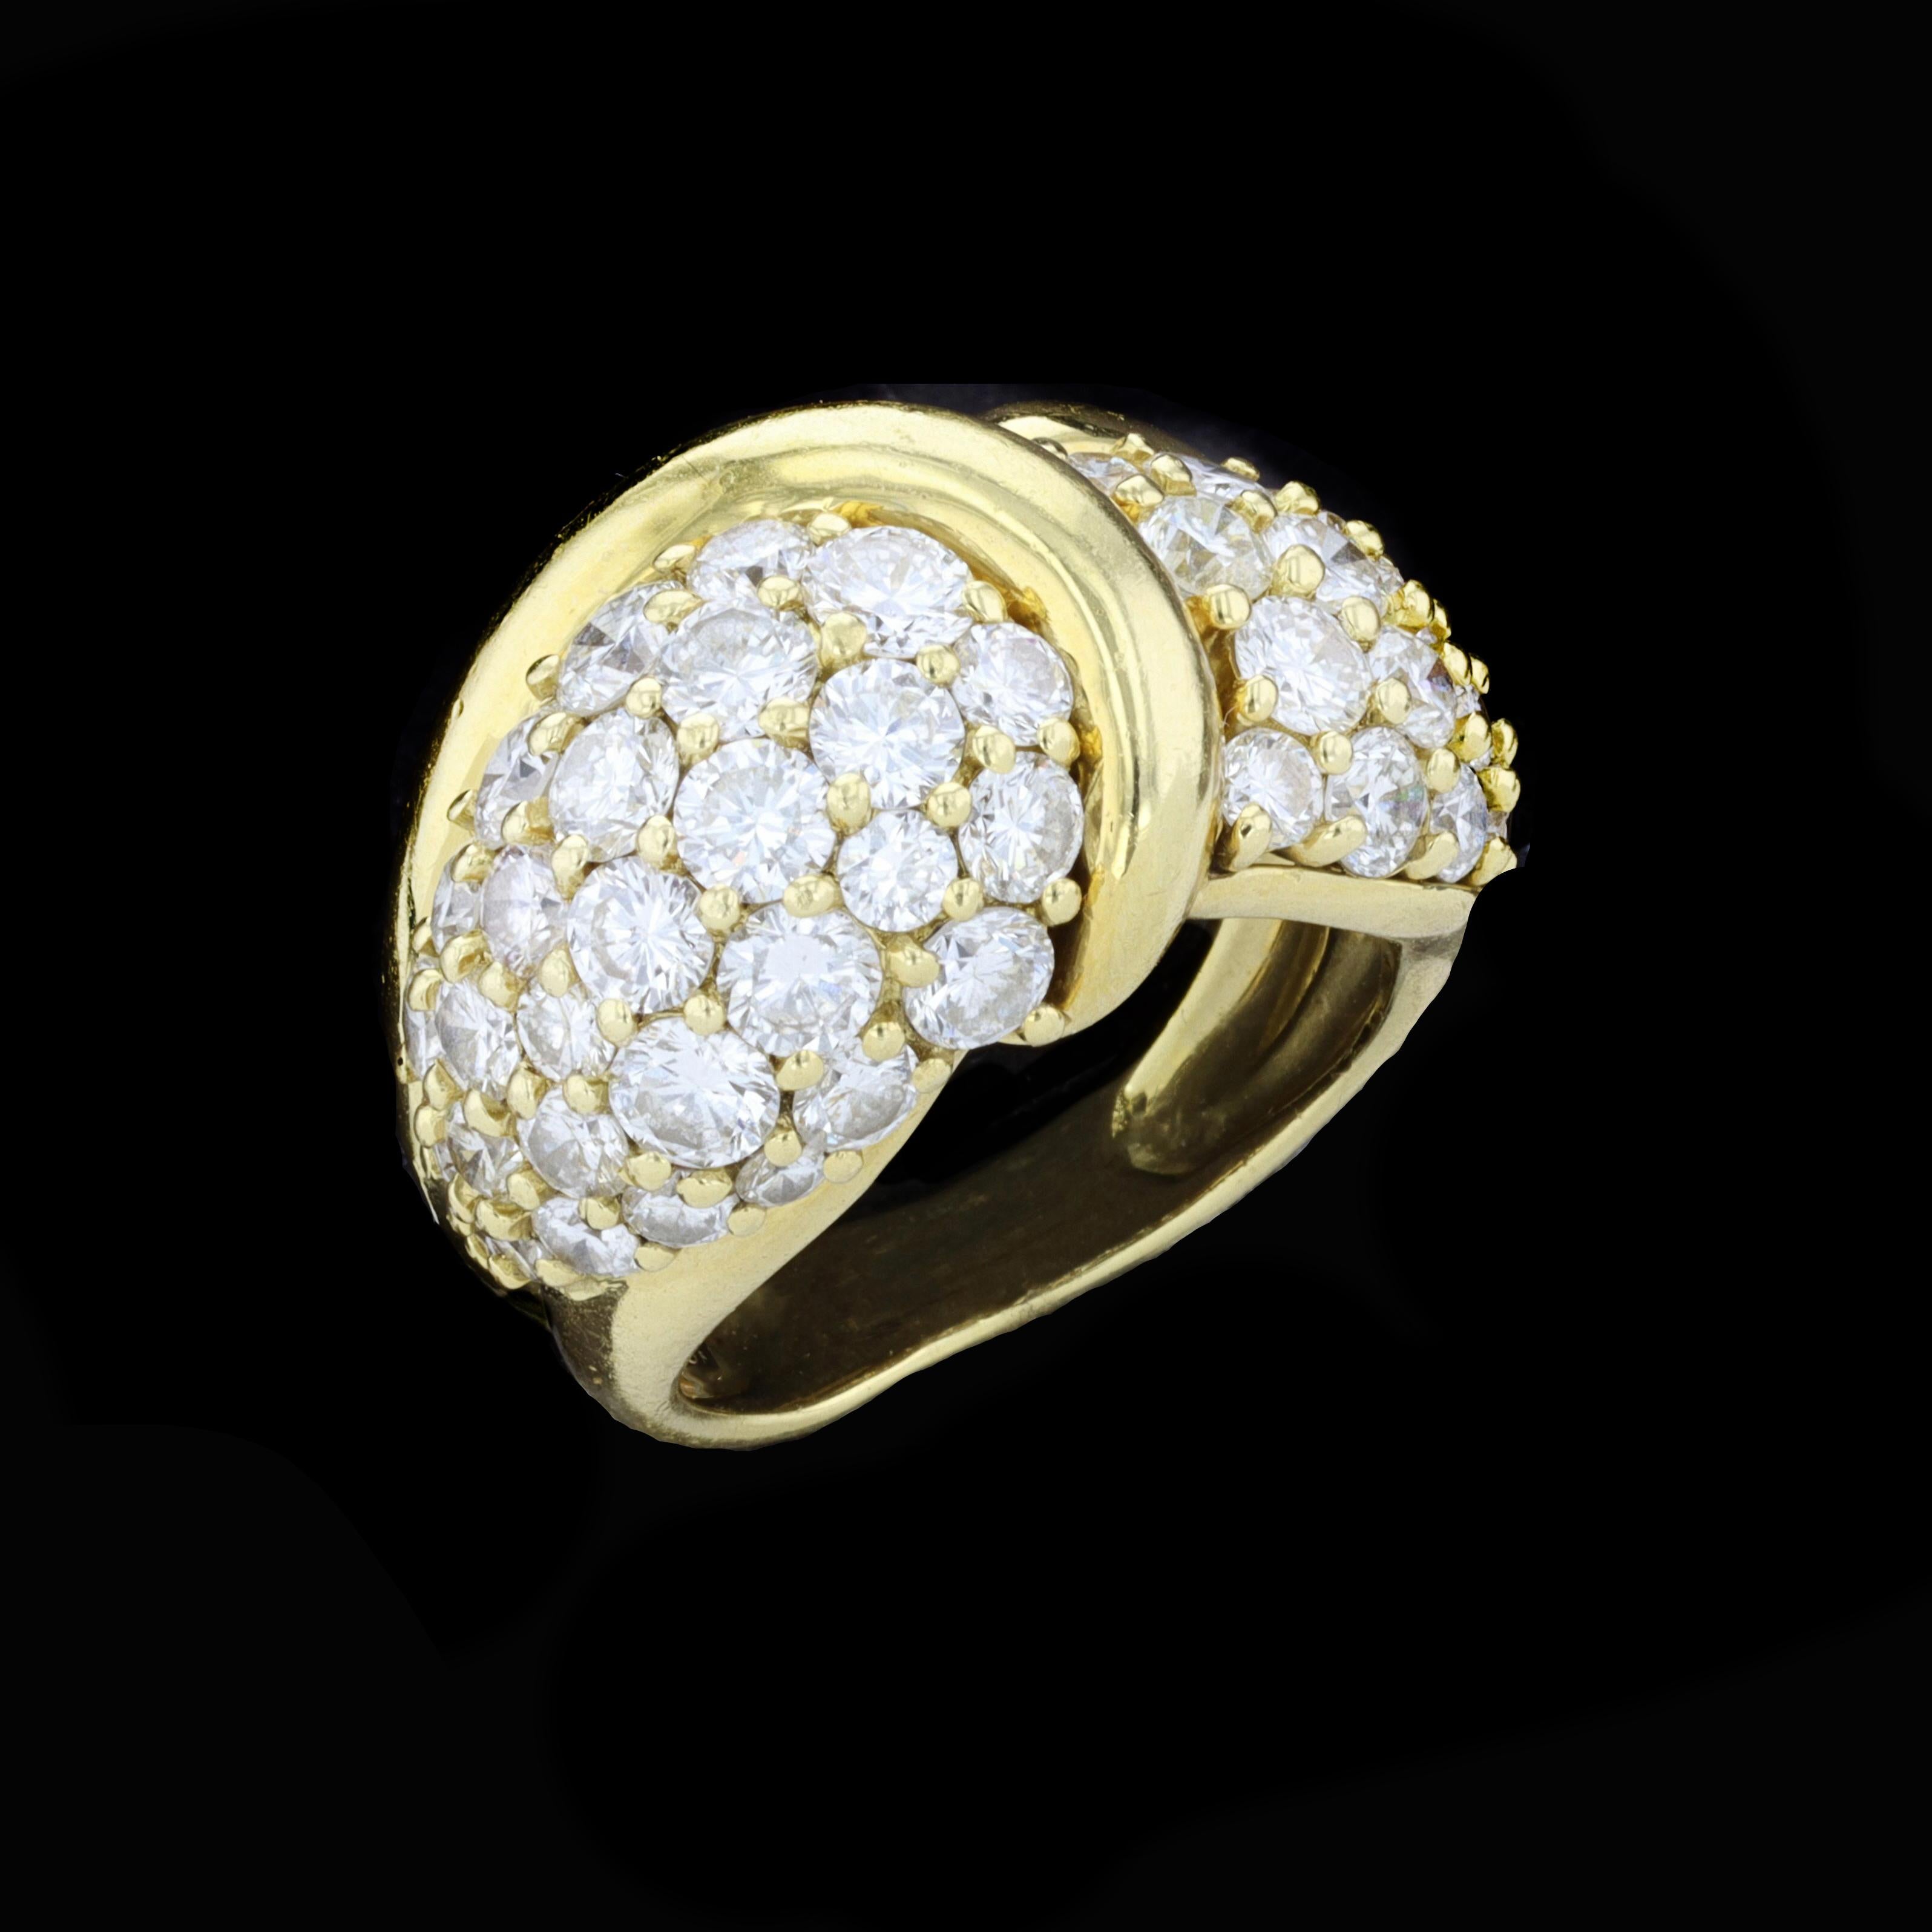 Glamour, glitter, and superb sparkle reign supreme in this gloriously gorgeous statement ring by designer Jose Hess. The 18K yellow gold ring is set with sparkling round cut diamonds that weigh approximately 5.50ct. The color of these diamonds is F